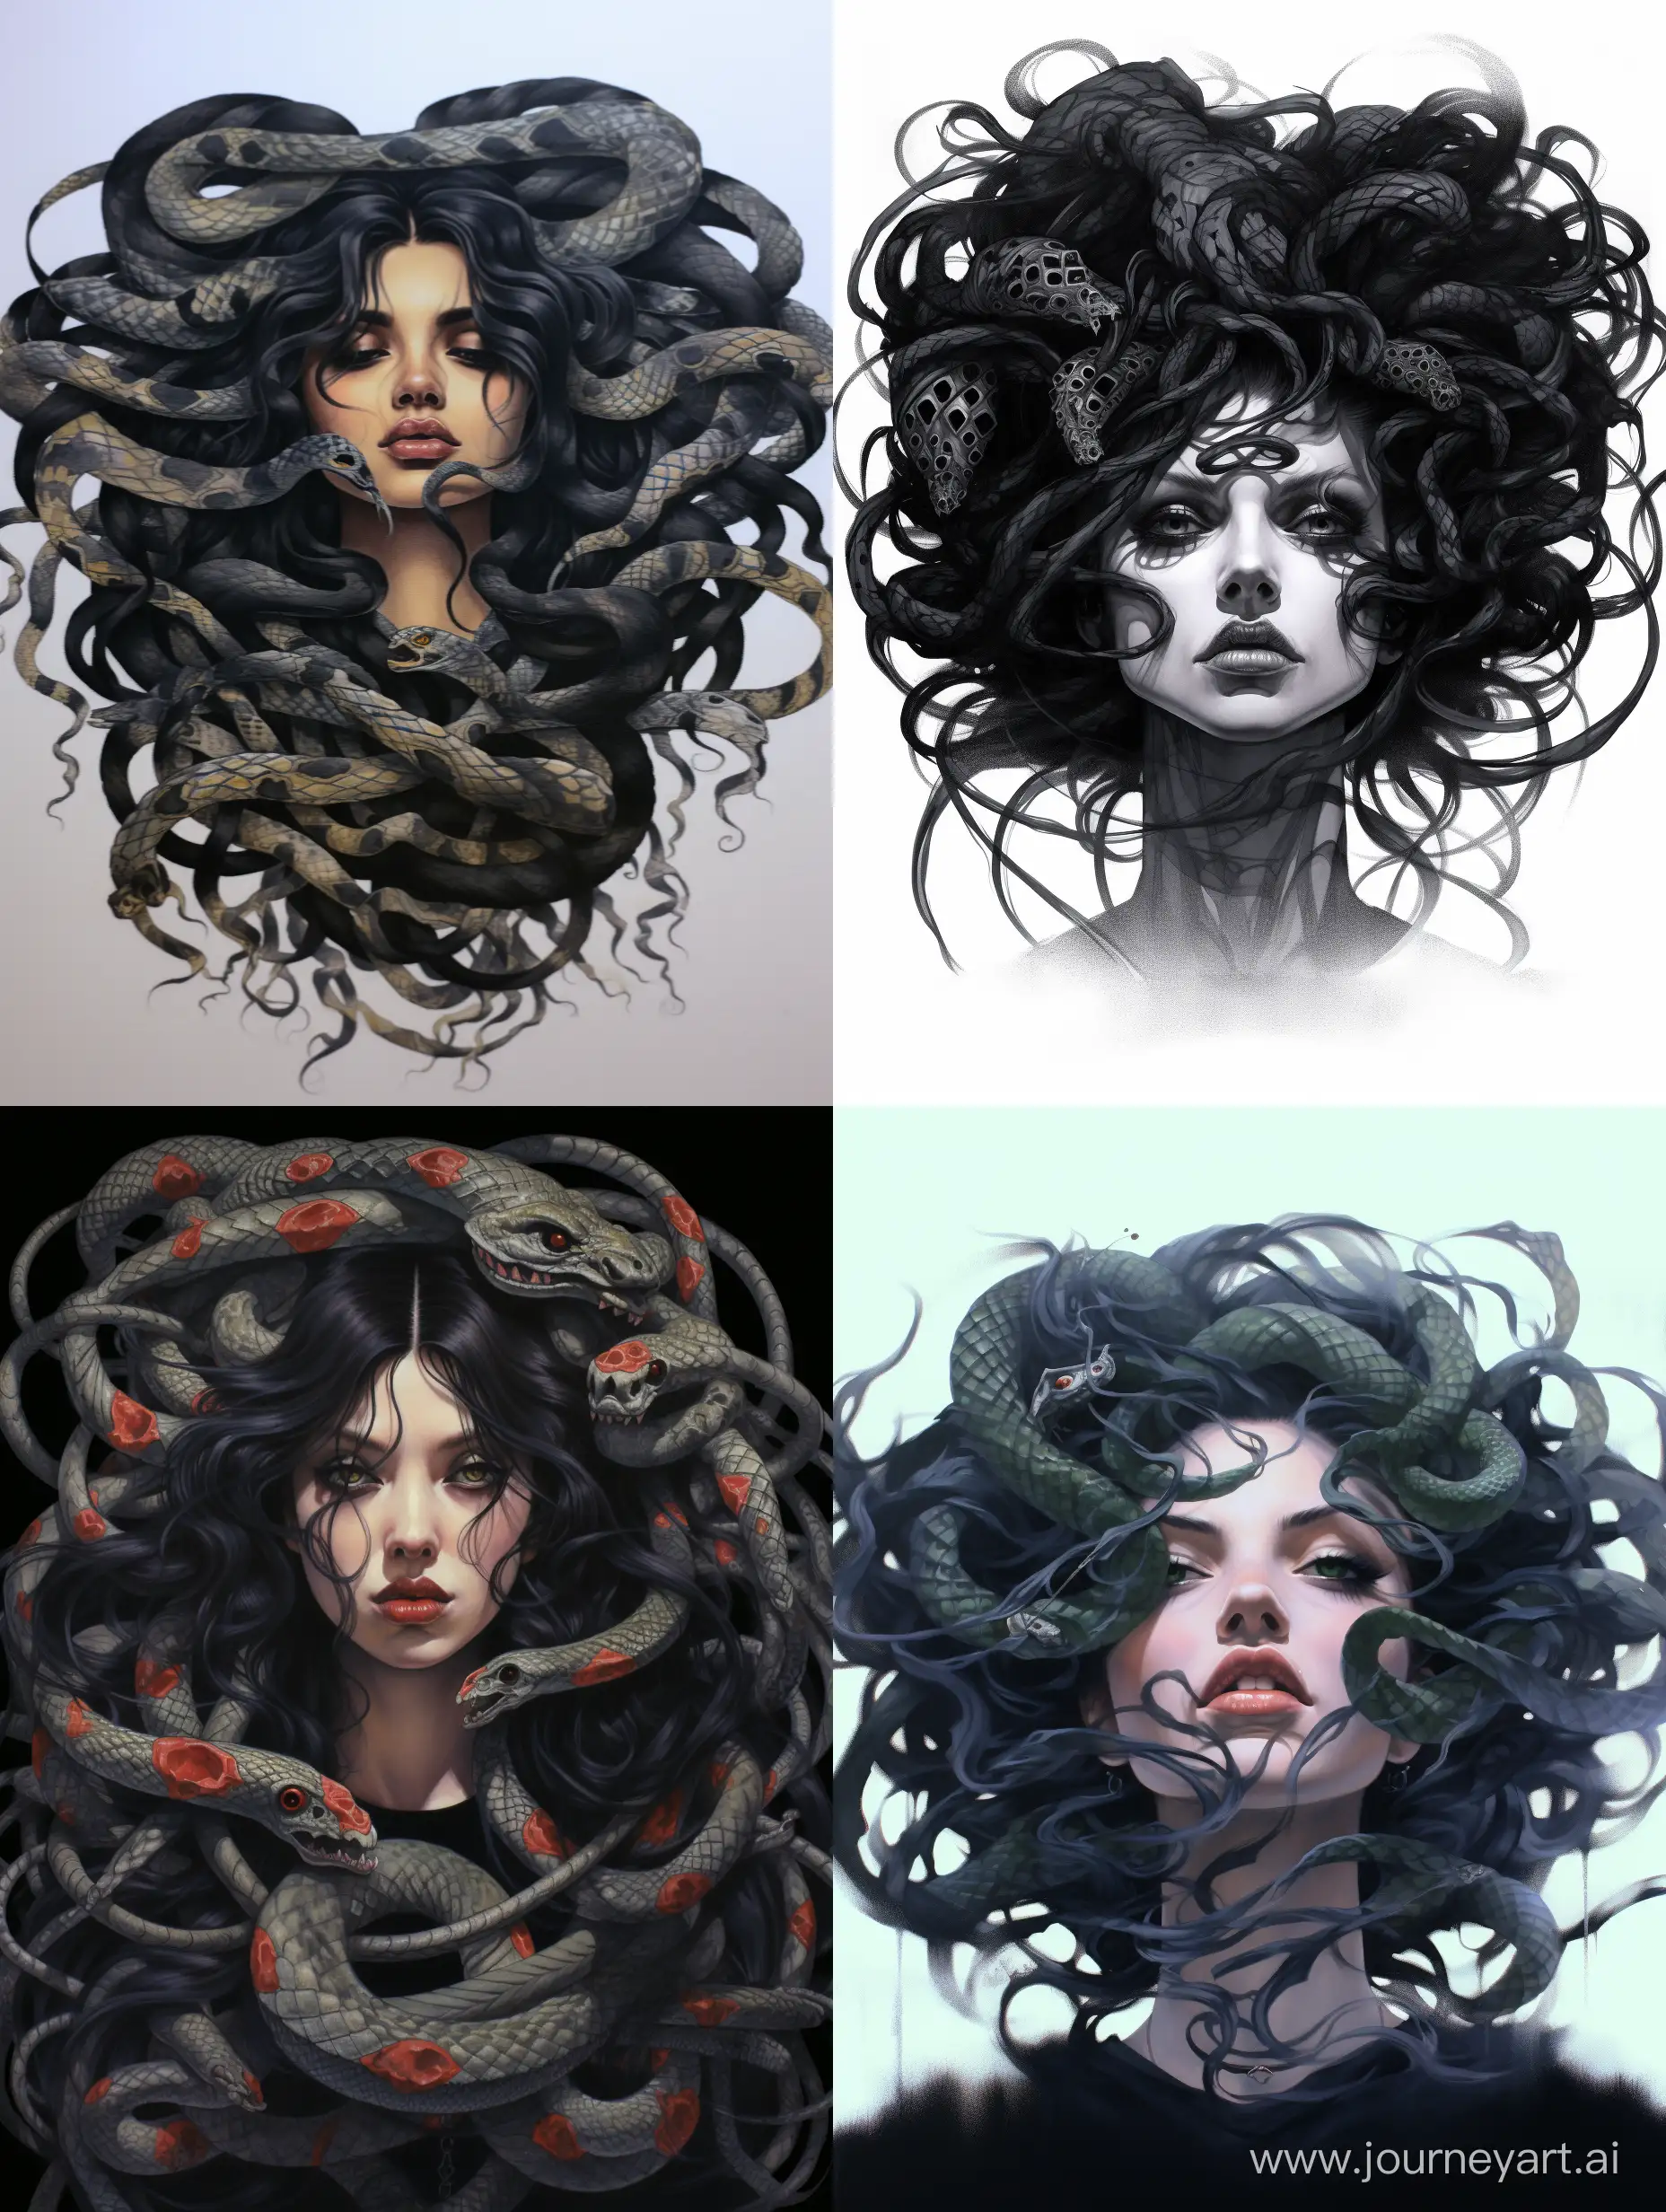 Mesmerizing-Medusa-Enchanting-Portrait-of-a-Gorgon-with-Snakes-and-Tattoos